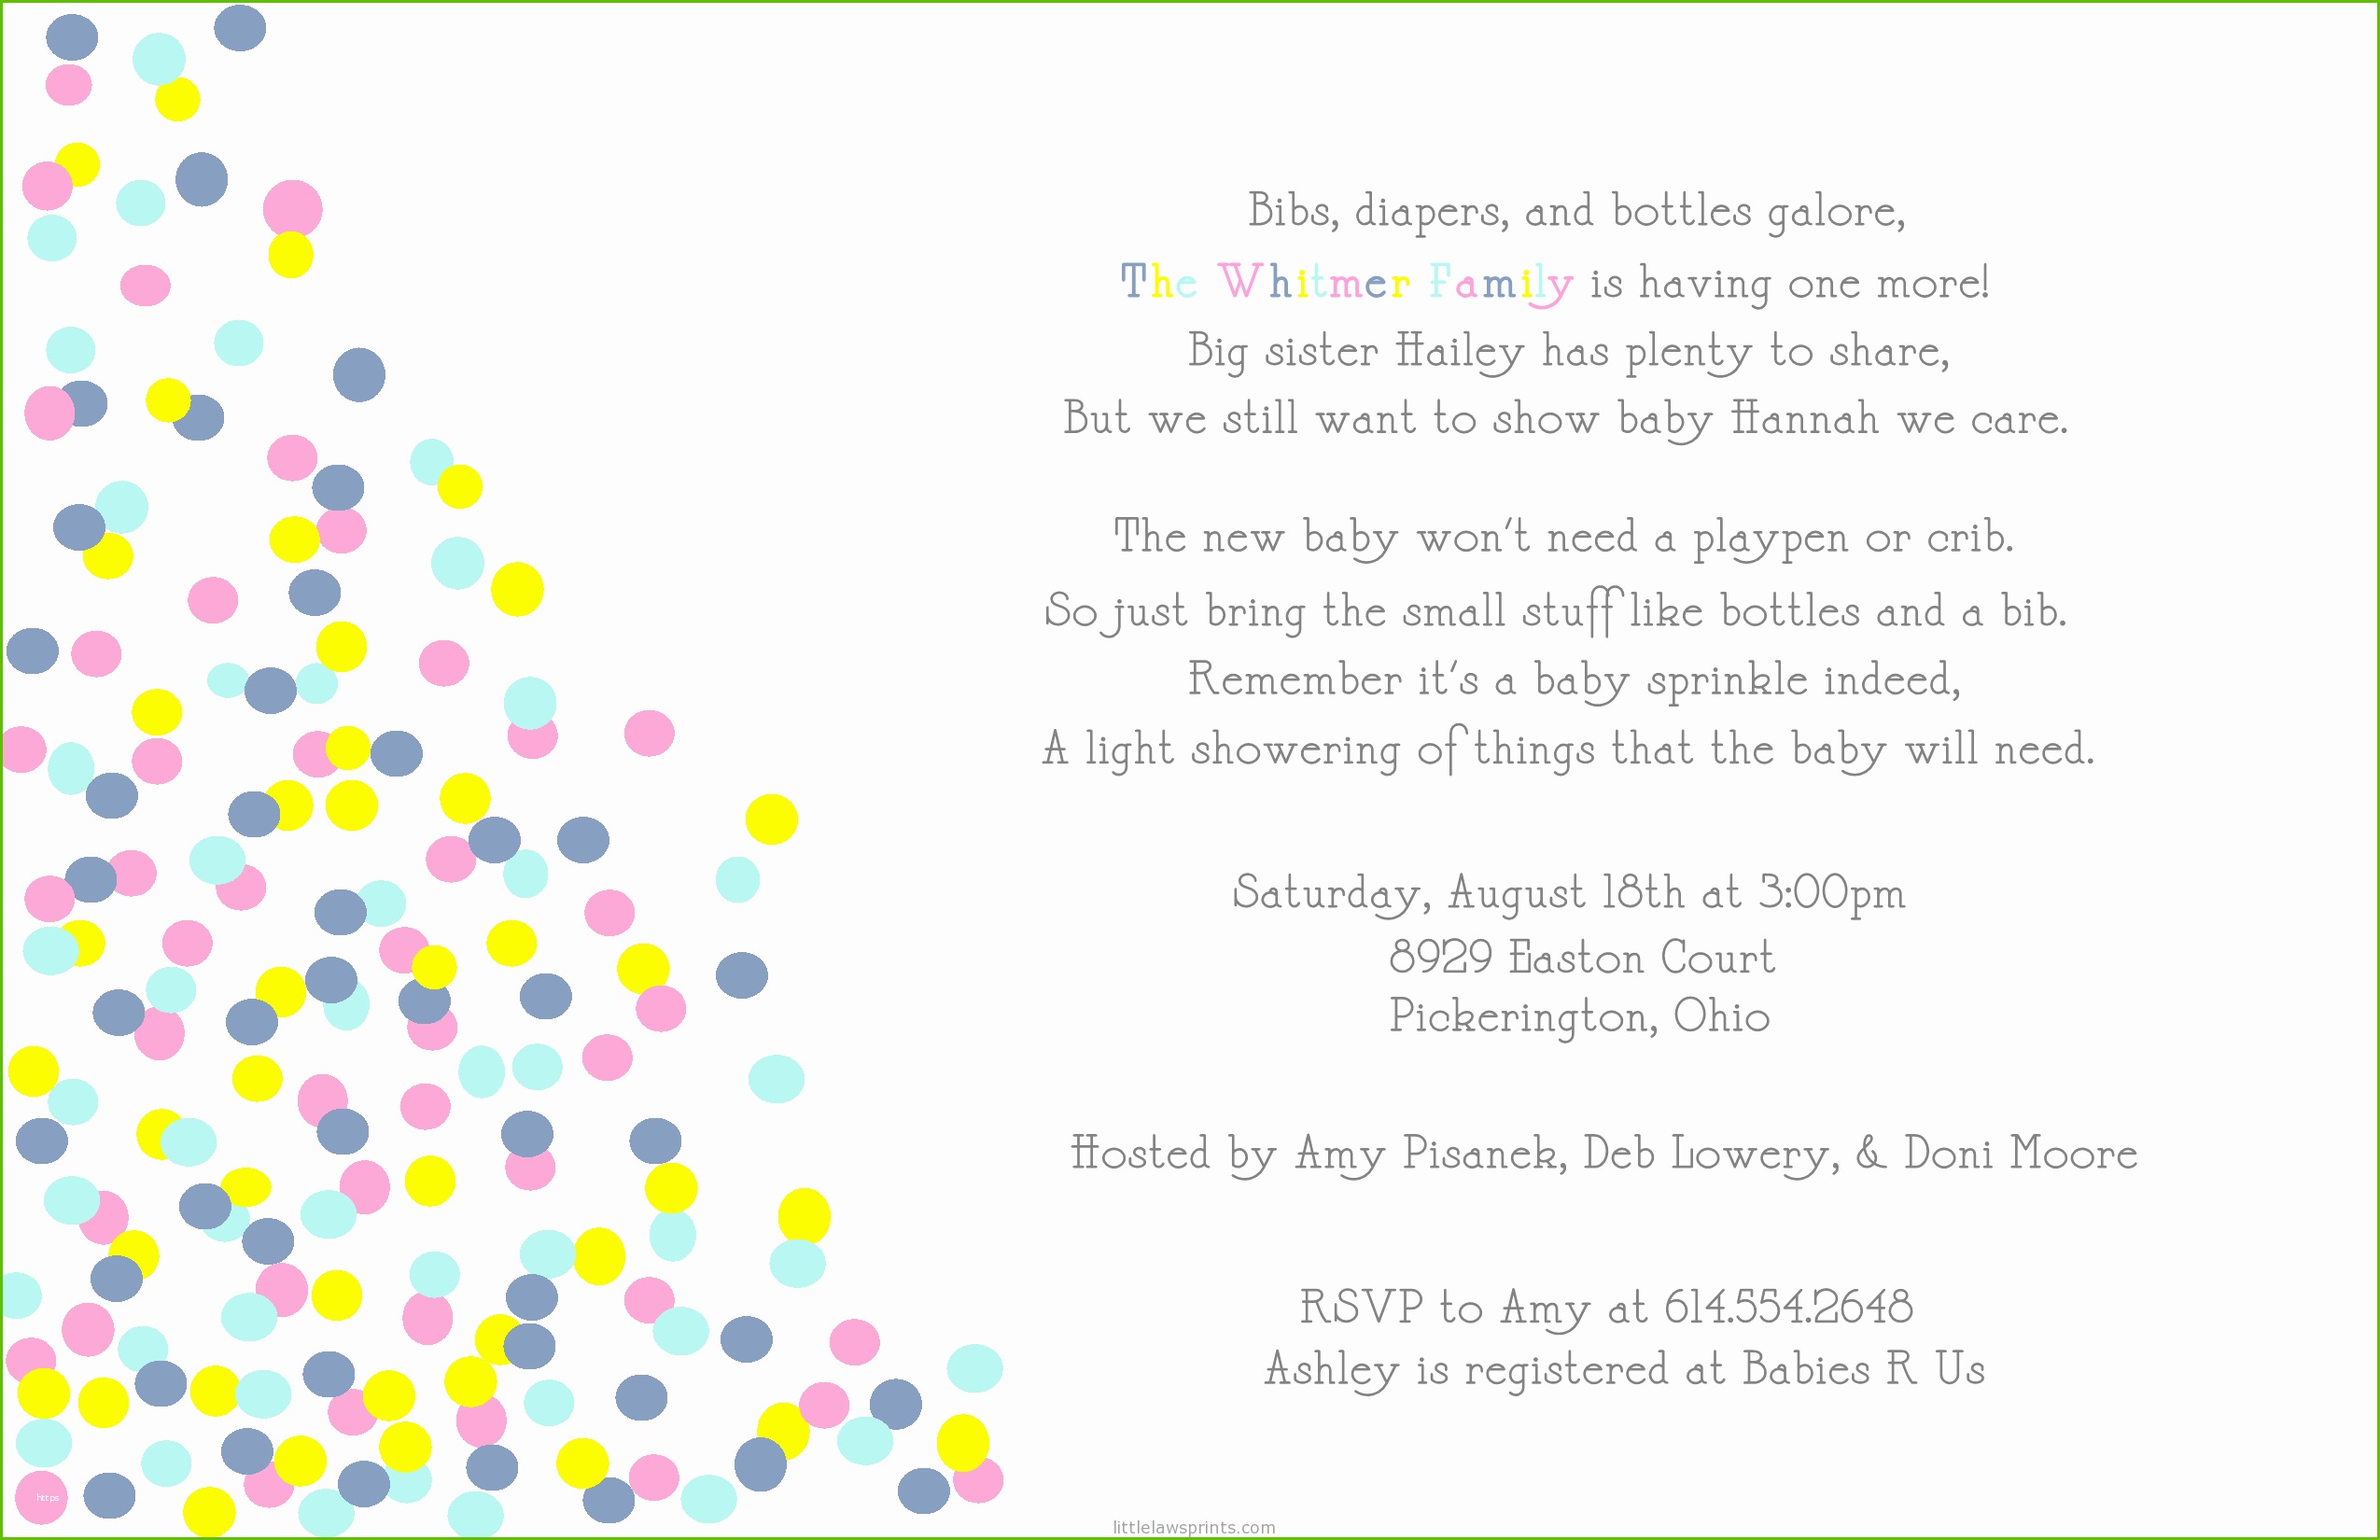 Full Size of Baby Shower:delightful Baby Shower Invitation Wording Picture Designs Baby Shower Invitation Wording As Well As Baby Shower Event With Baby Shower At The Park Plus Printable Baby Shower Cards Together With Baby Shower Hampers